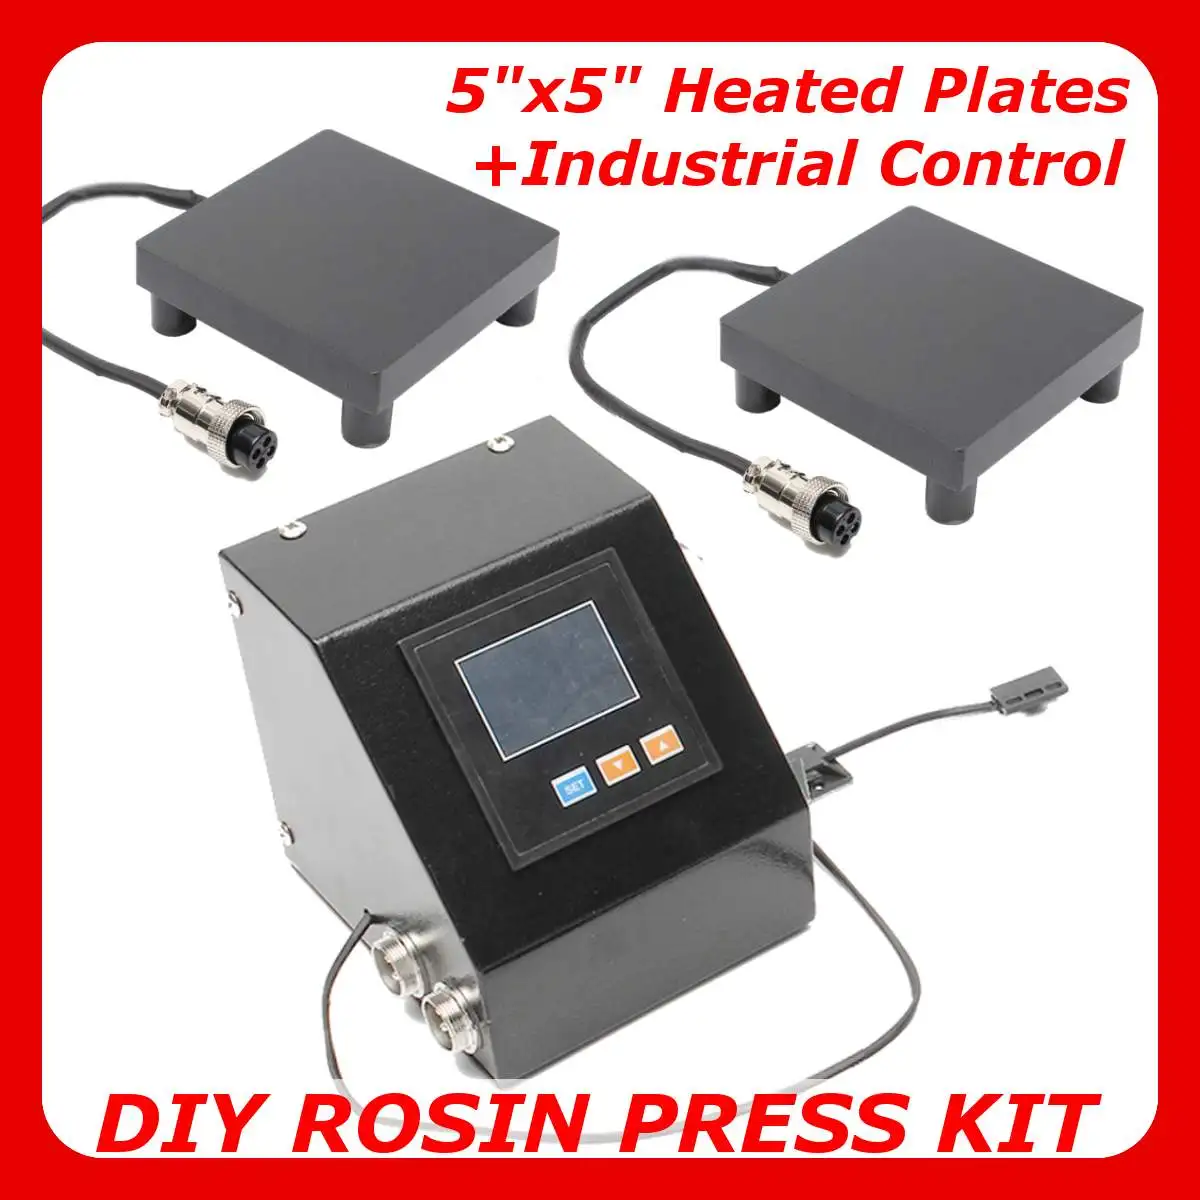 5x5 Inch Rosin Press Kits Heated Plates Industrial LCD Temper Controller with Aerrial Plug DIY